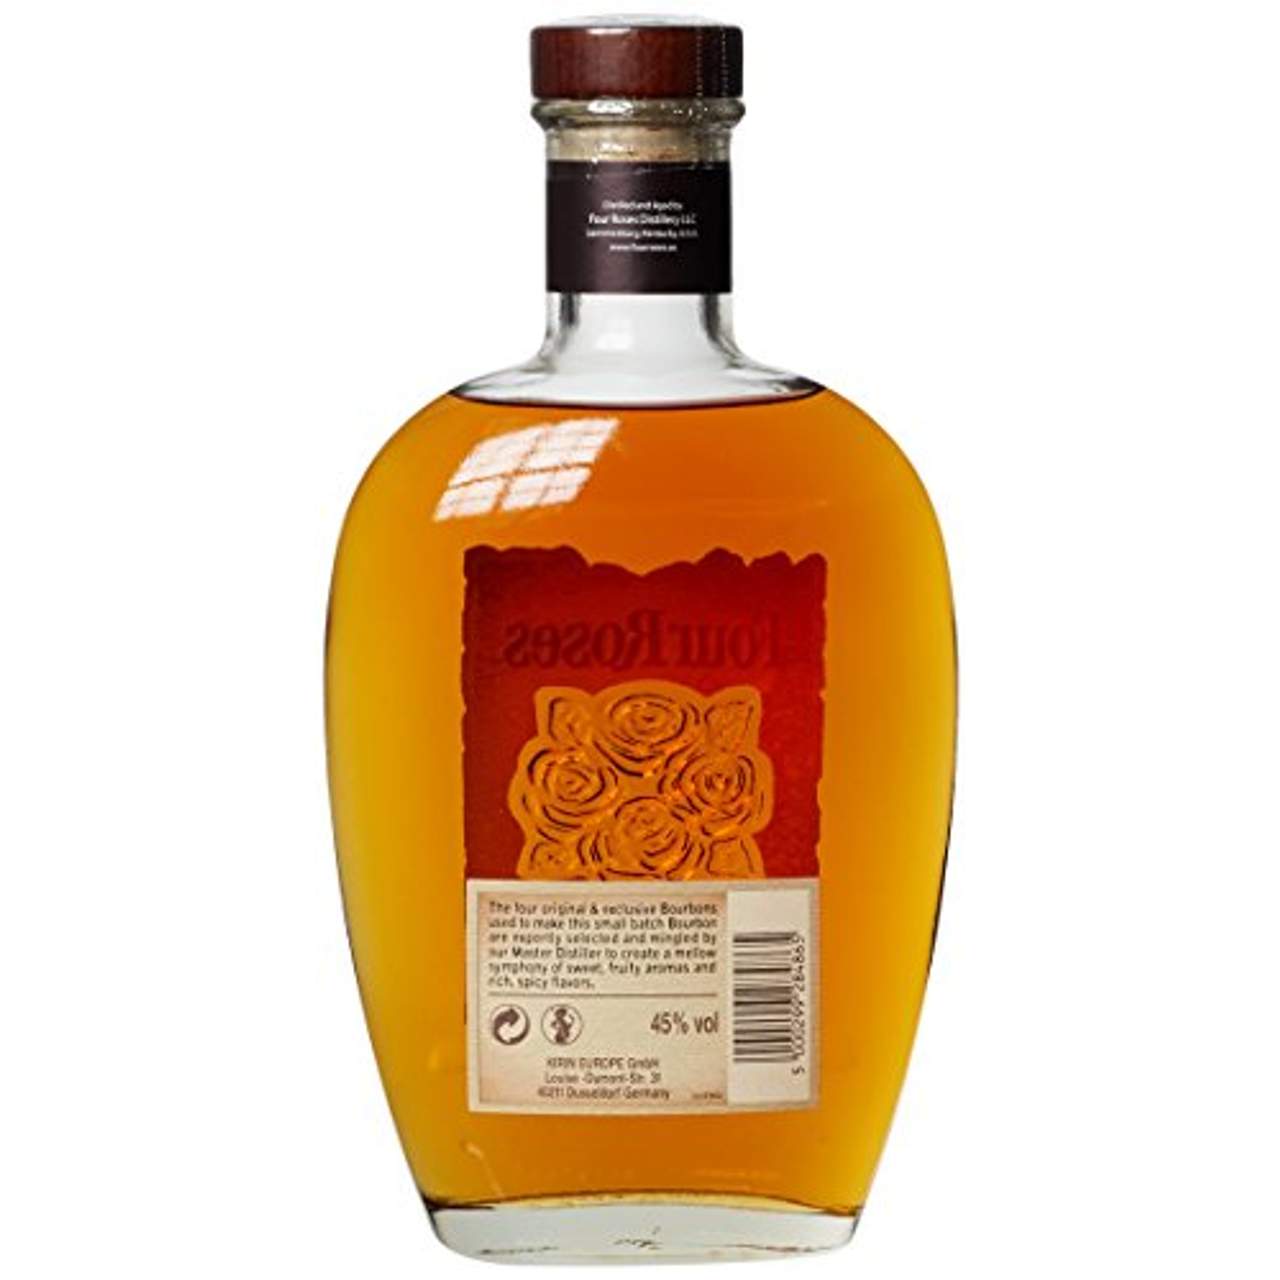 Four Roses Small Batch Bourbon Whisky